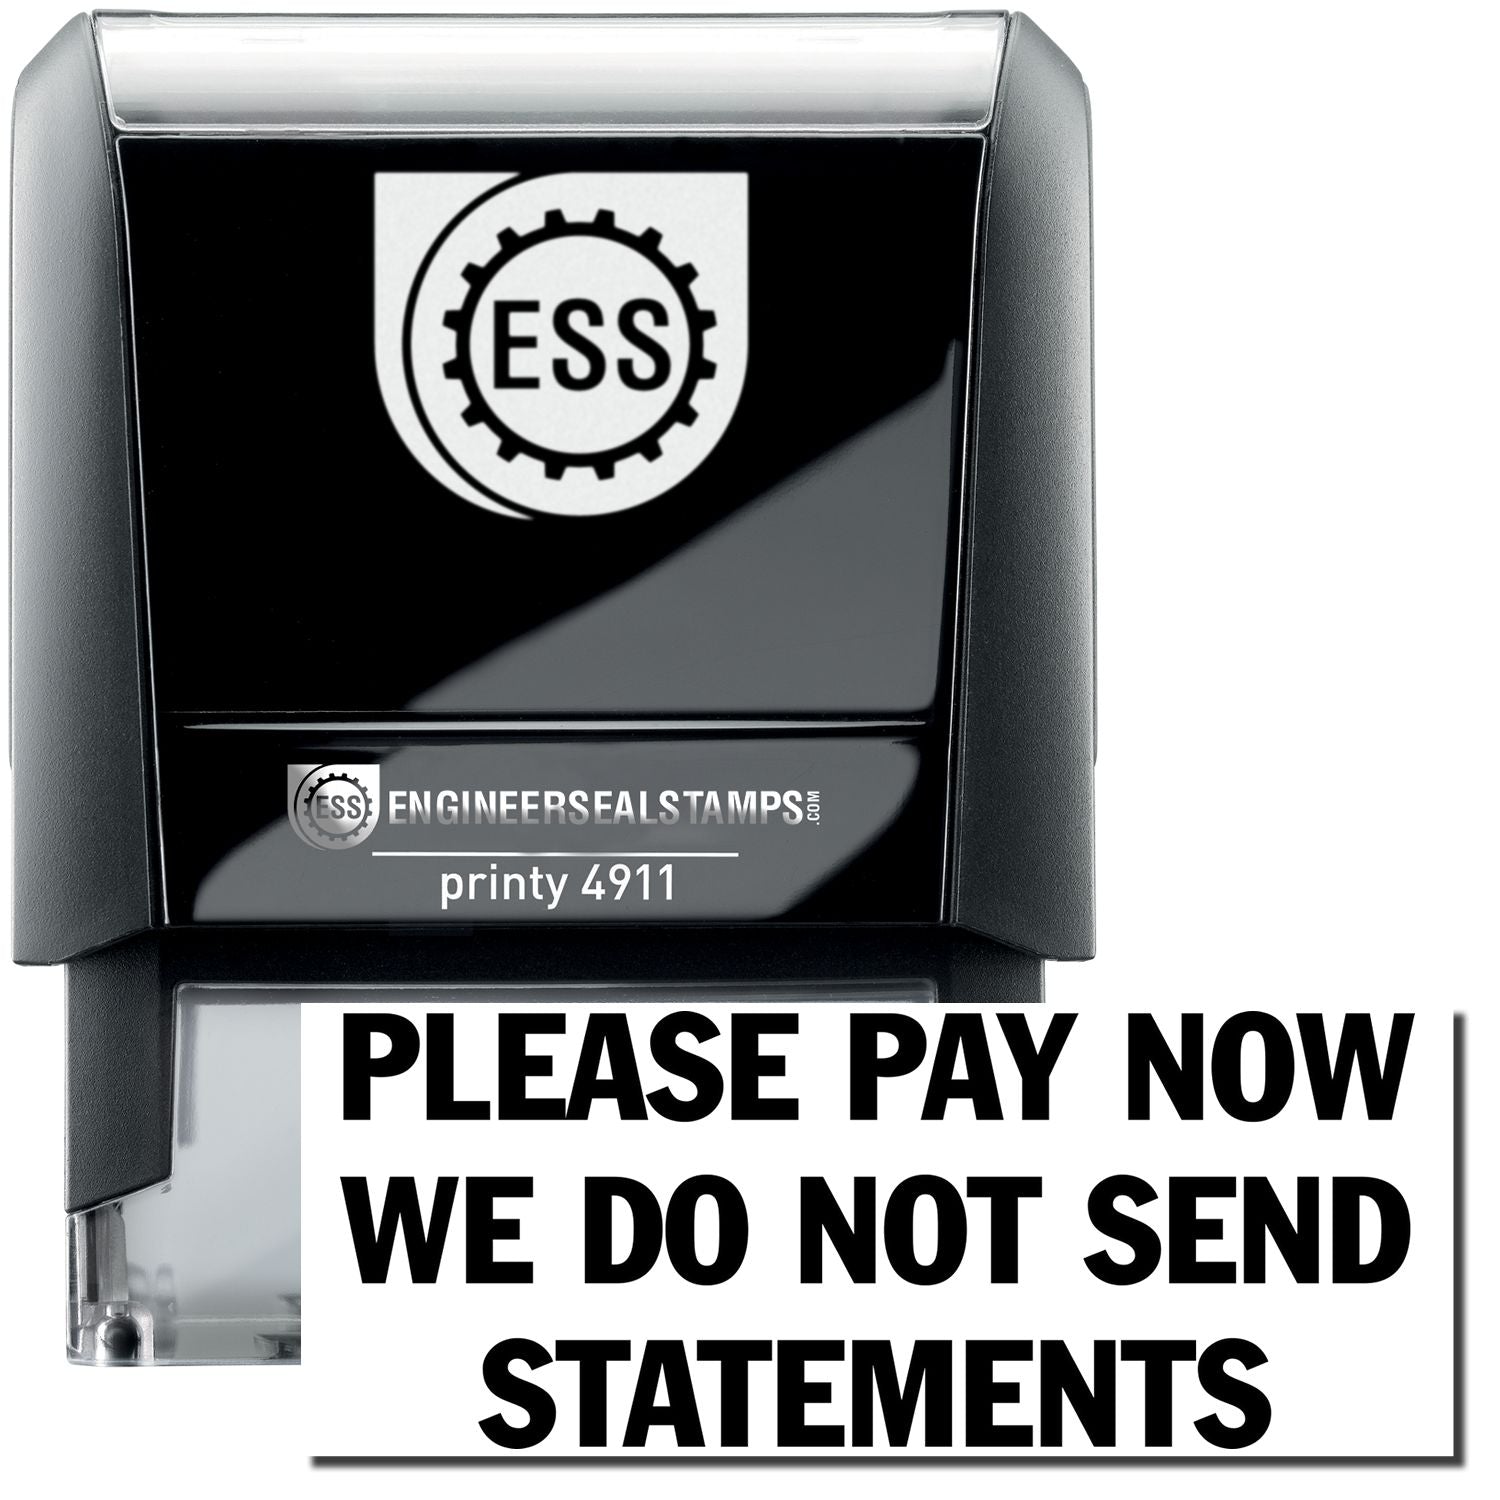 A self-inking stamp with a stamped image showing how the text "PLEASE PAY NOW WE DO NOT SEND STATEMENTS" is displayed after stamping.